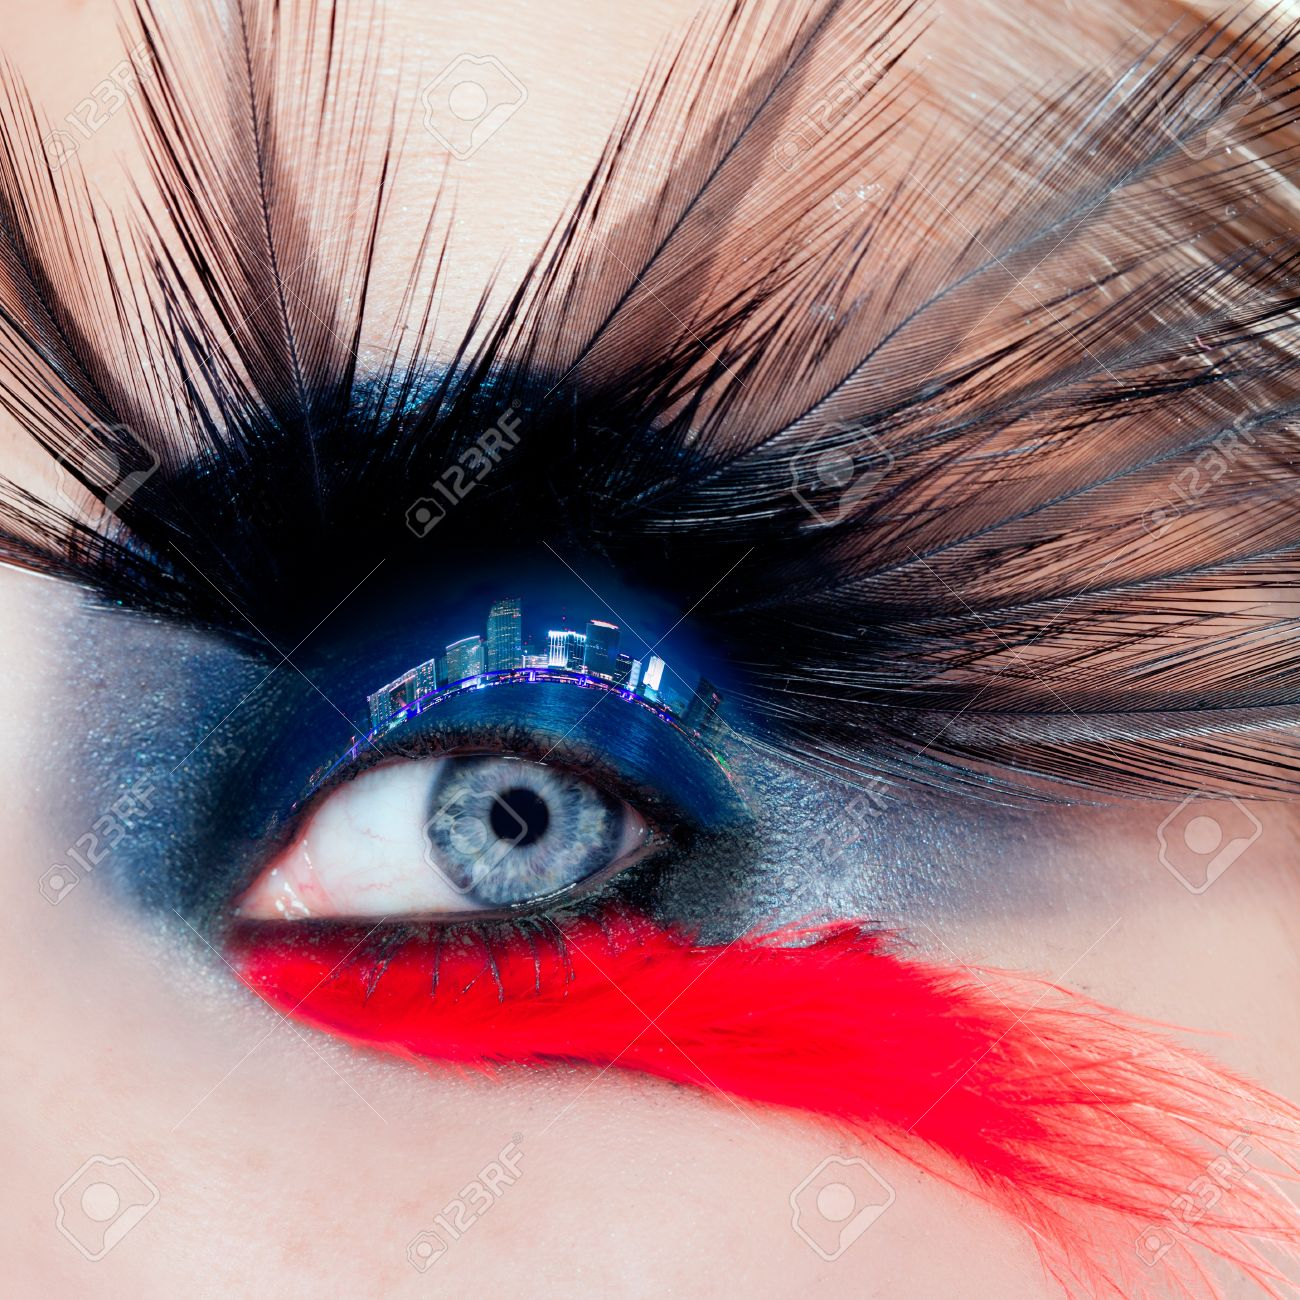 Red And Black Eye Makeup Blue Woman Eye Makeup Bird Inspired With Black And Red Feathers